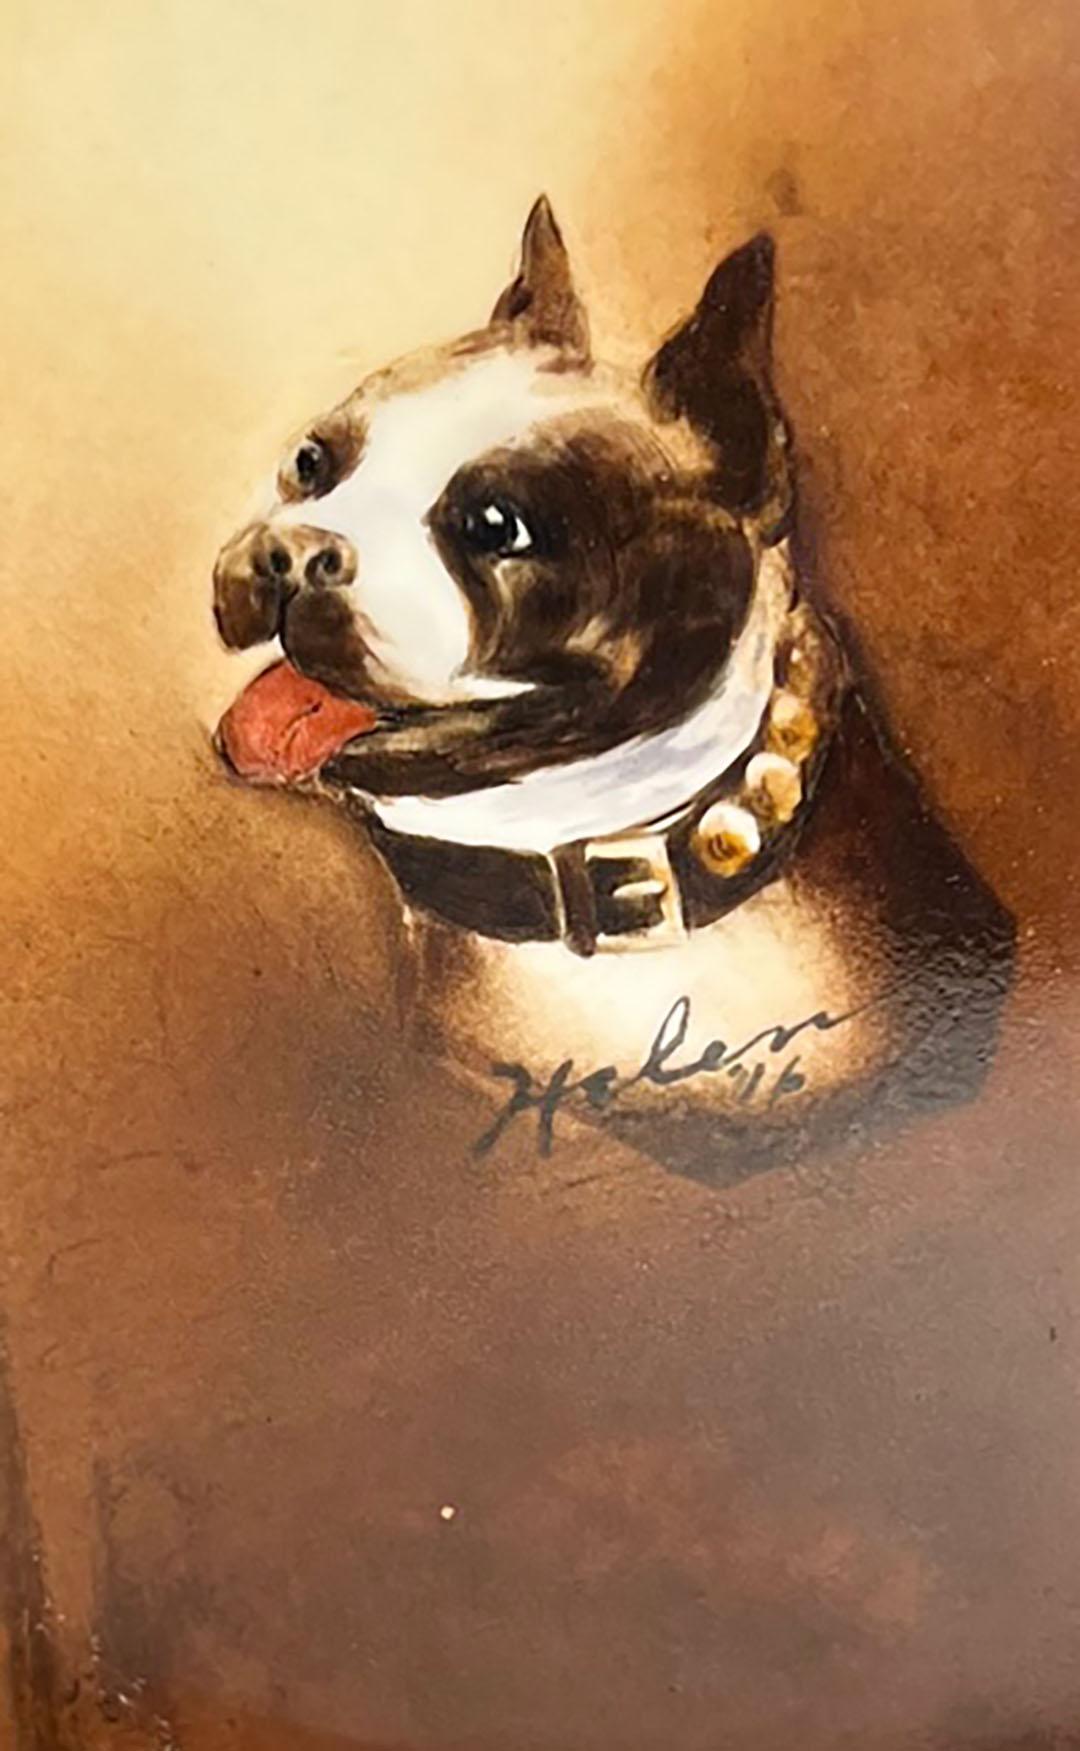 Porcelain Boston bull terrier portrait mounted in its original frame with stand. Signed on the front, Helen, 46.